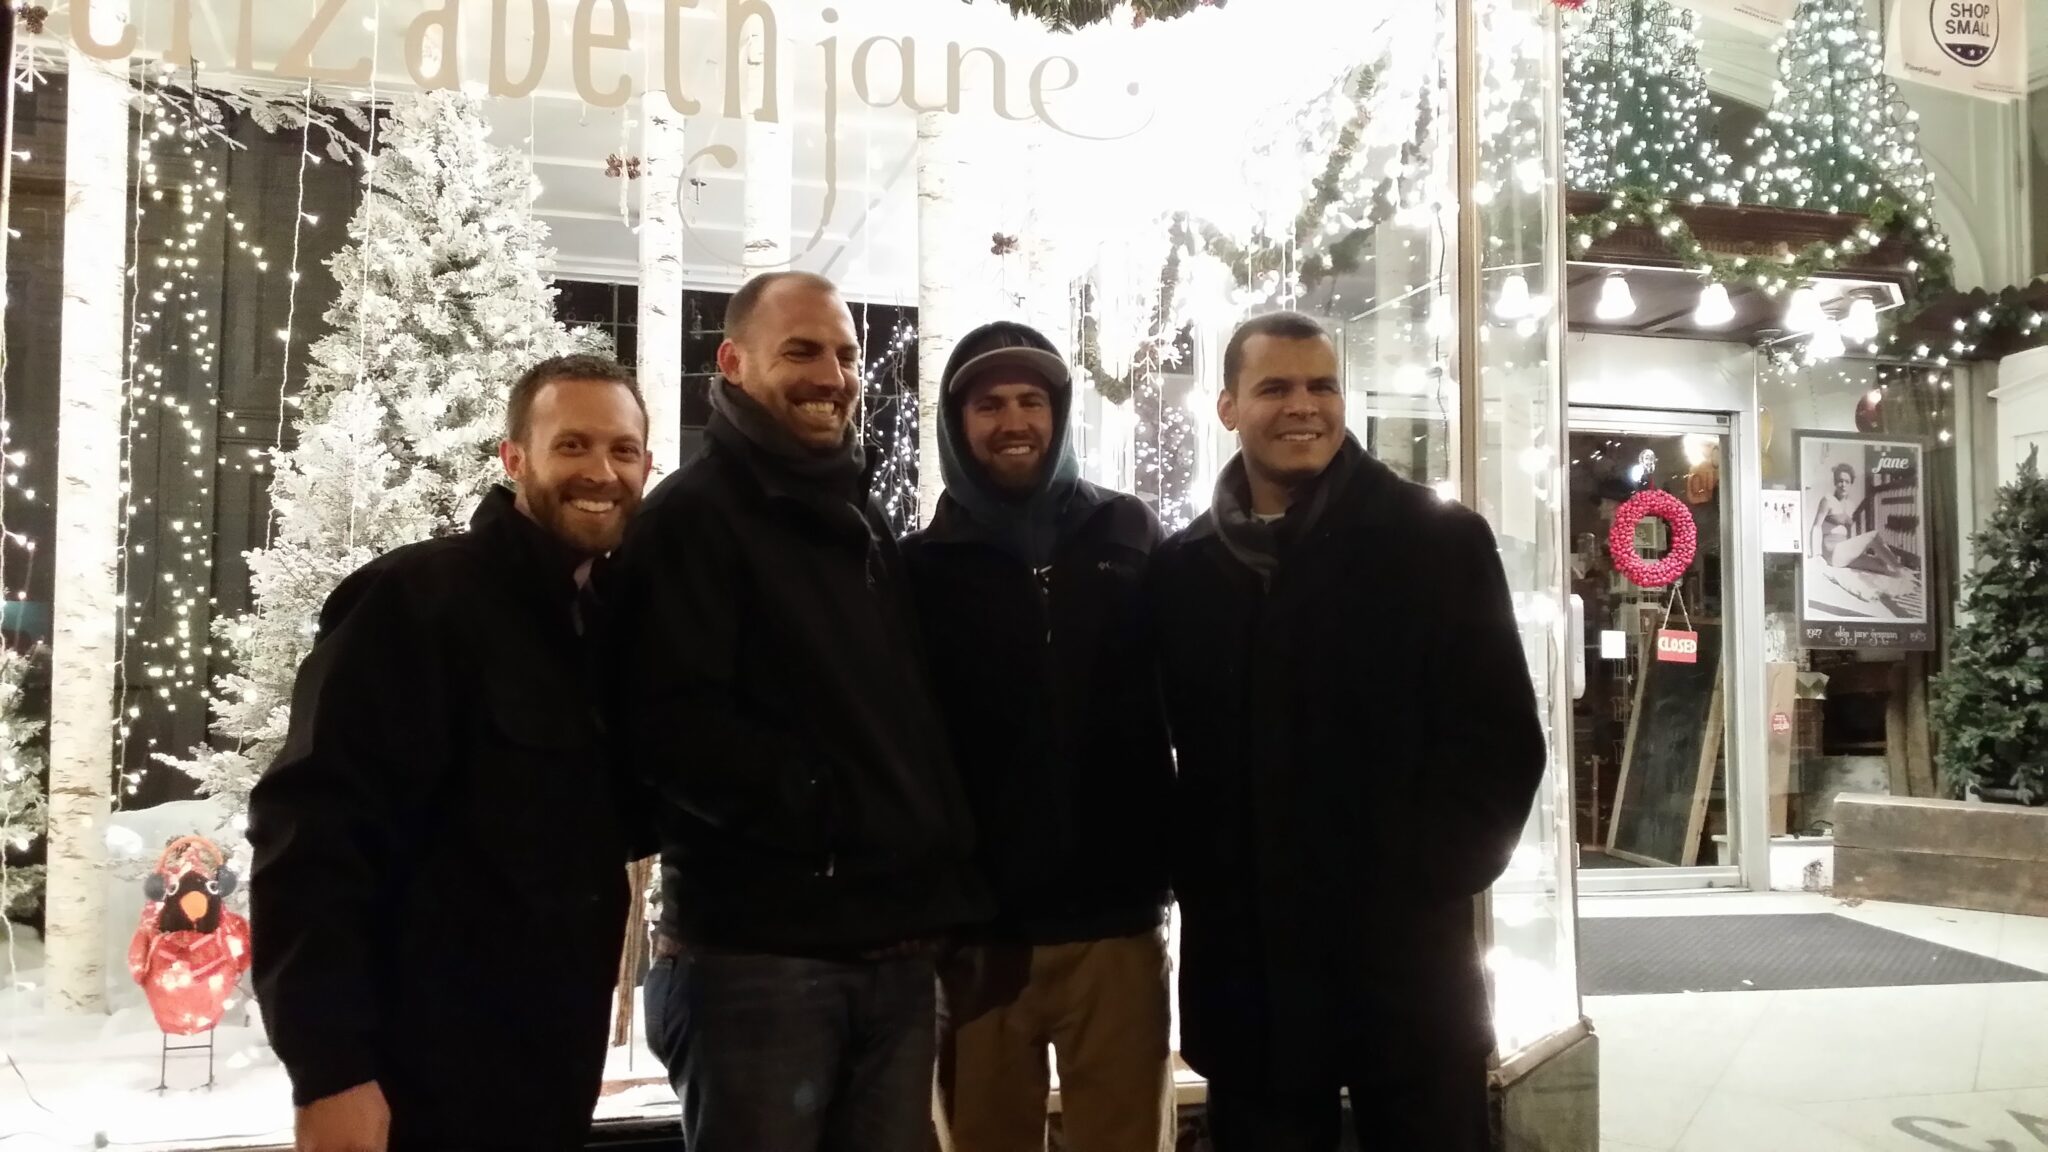 Four men wearing winter coats smile and stand close together for a group picture outside in front of a storefront decorated for the holidays with lights